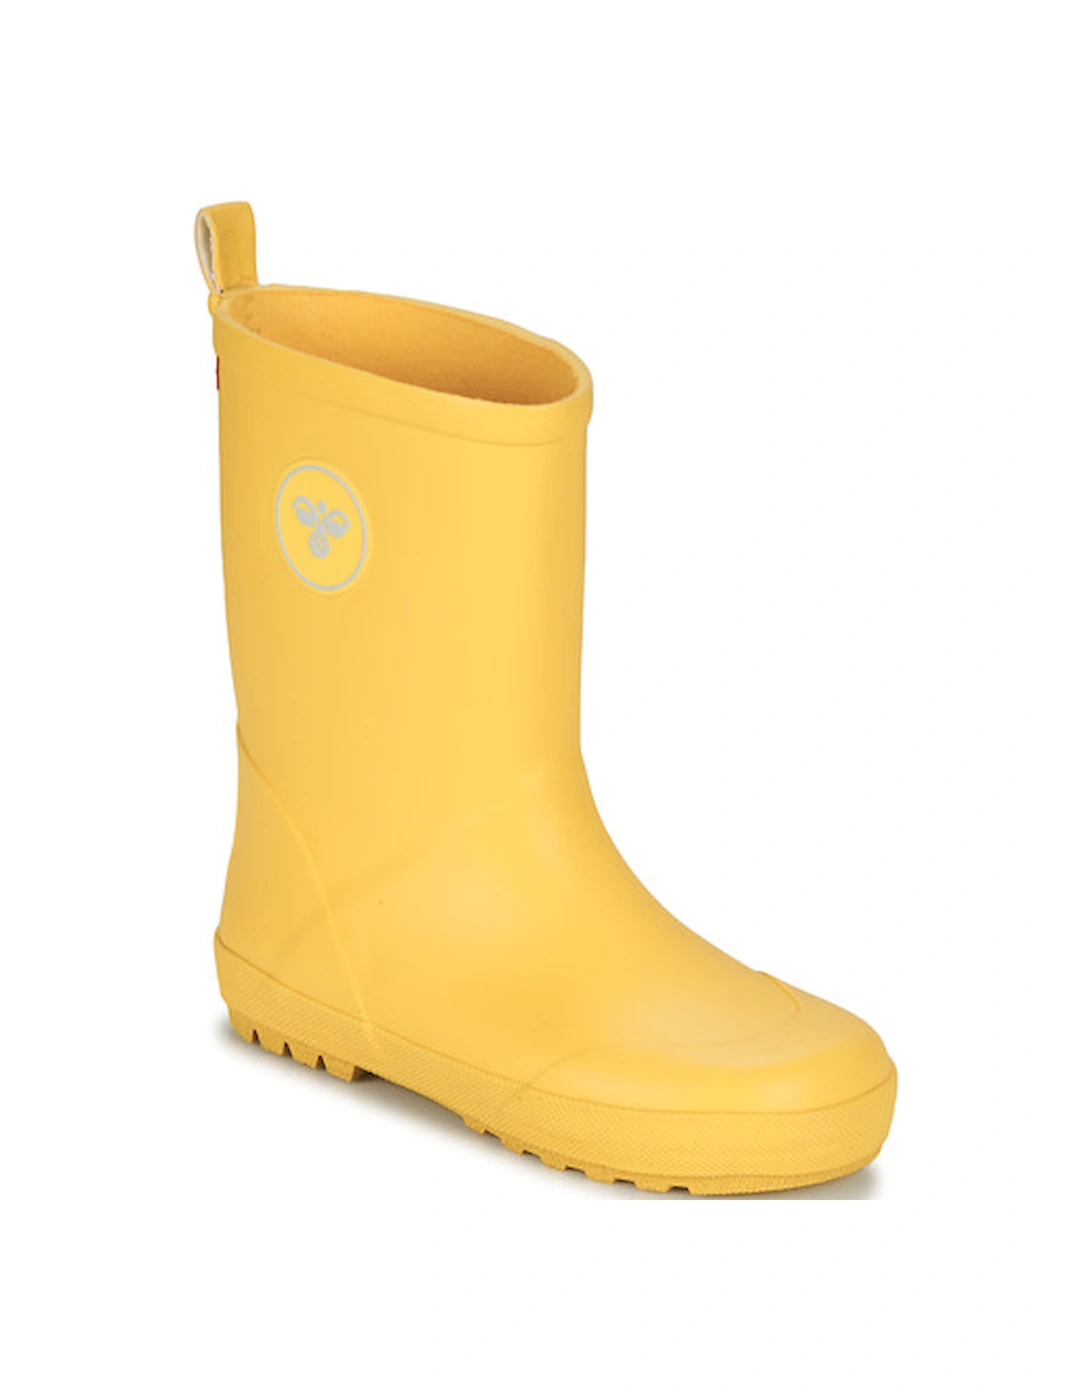 RUBBER BOOT JR., 8 of 7